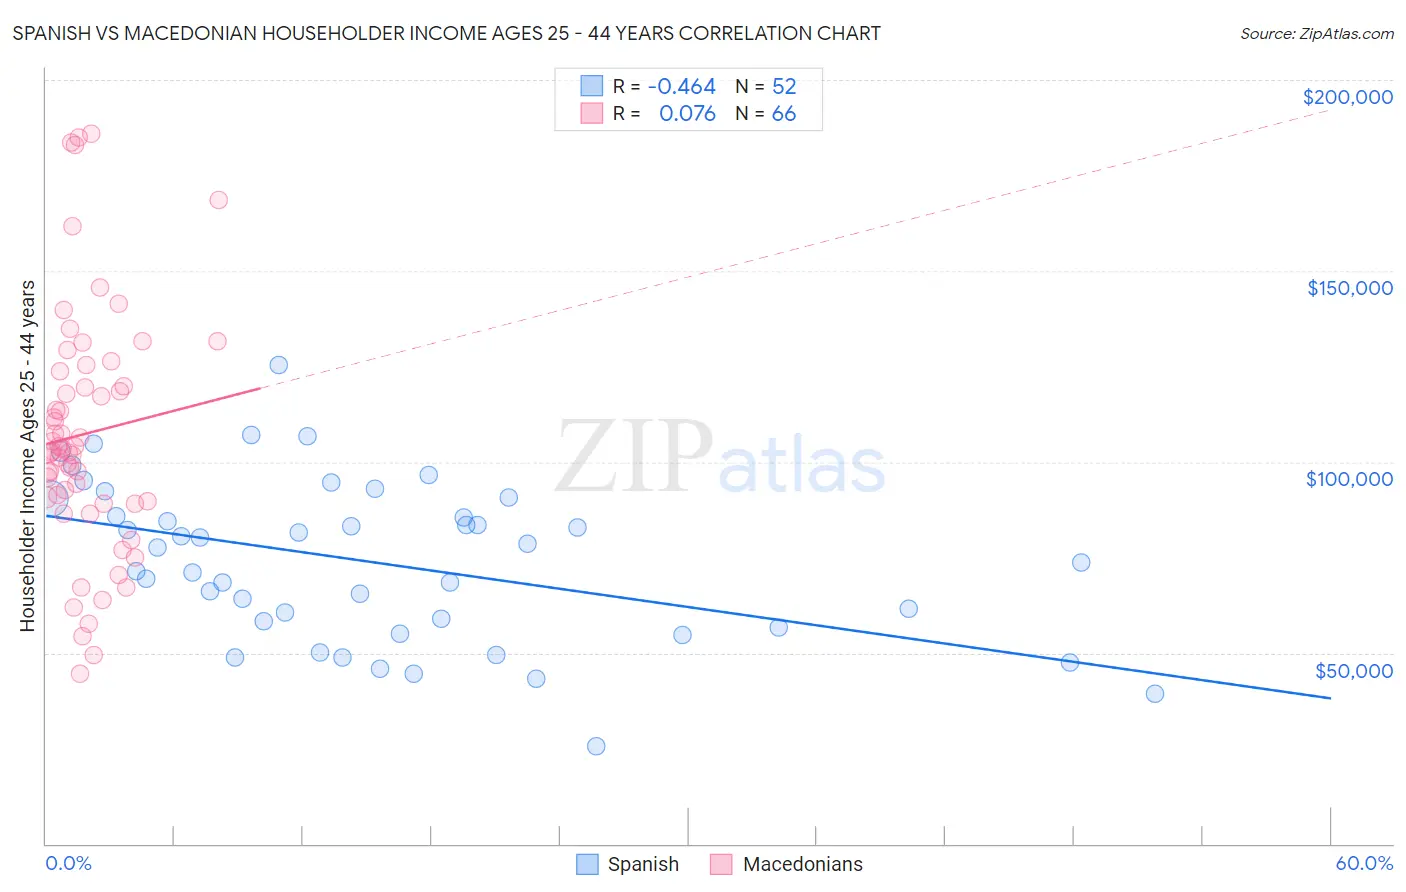 Spanish vs Macedonian Householder Income Ages 25 - 44 years